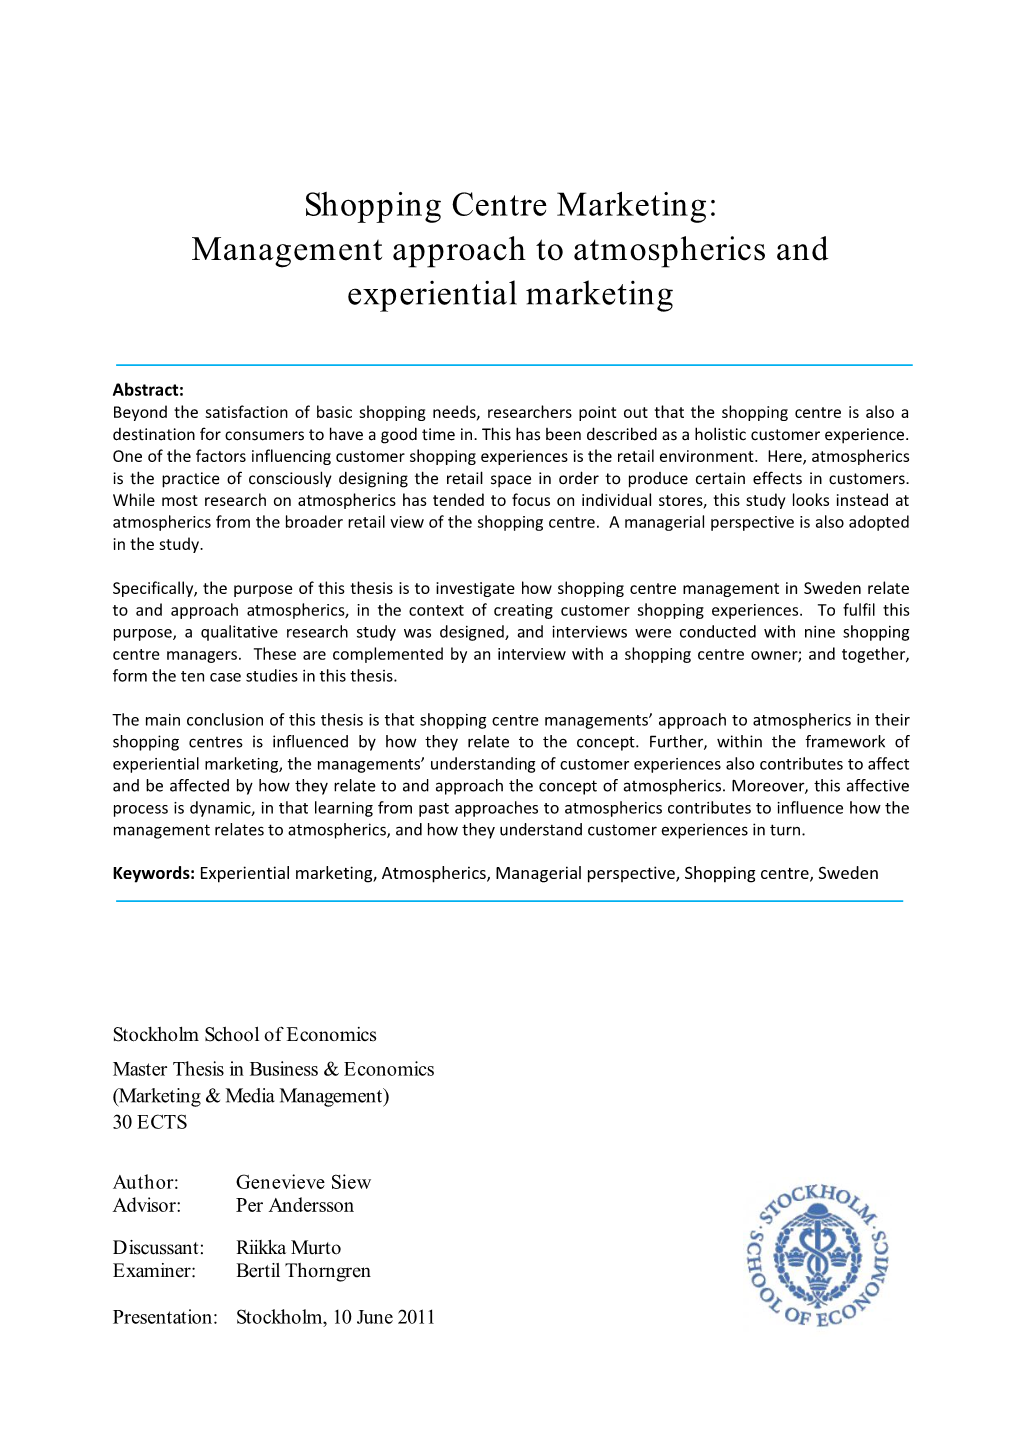 Shopping Centre Marketing: Management Approach to Atmospherics and Experiential Marketing